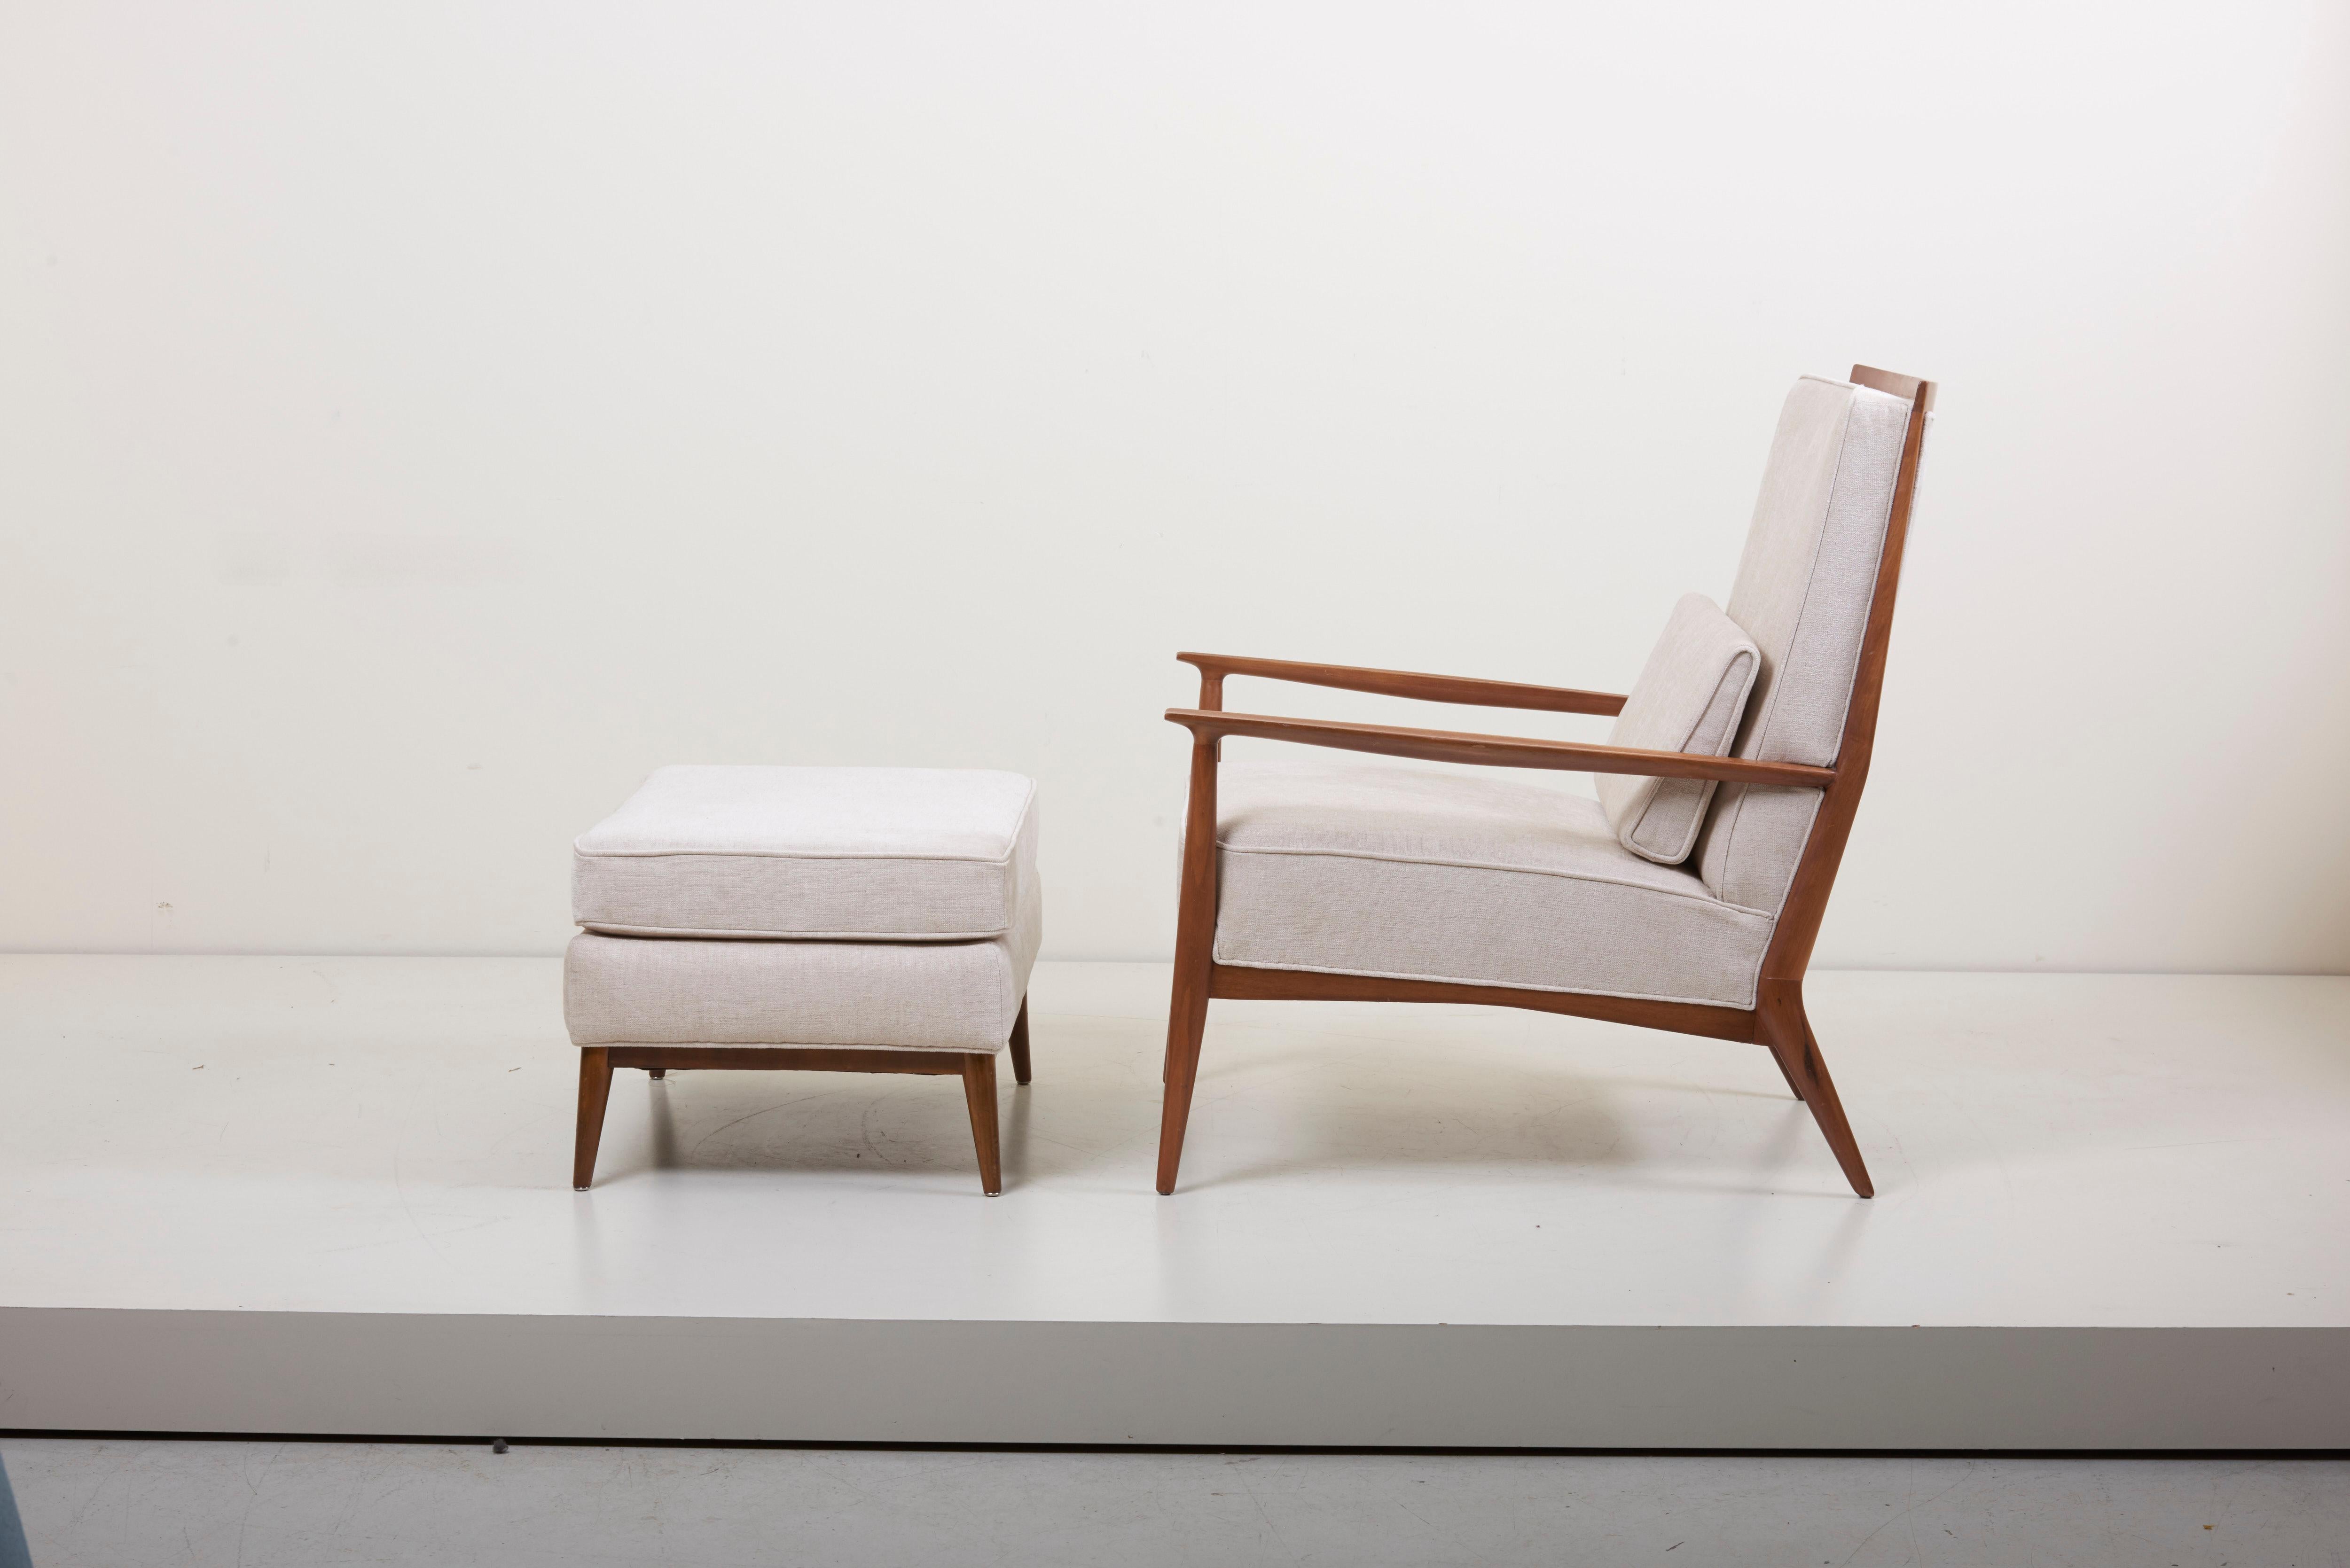 20th Century Pair of Lounge Chairs with an Ottoman by Paul McCobb for Directional, US, 1950s